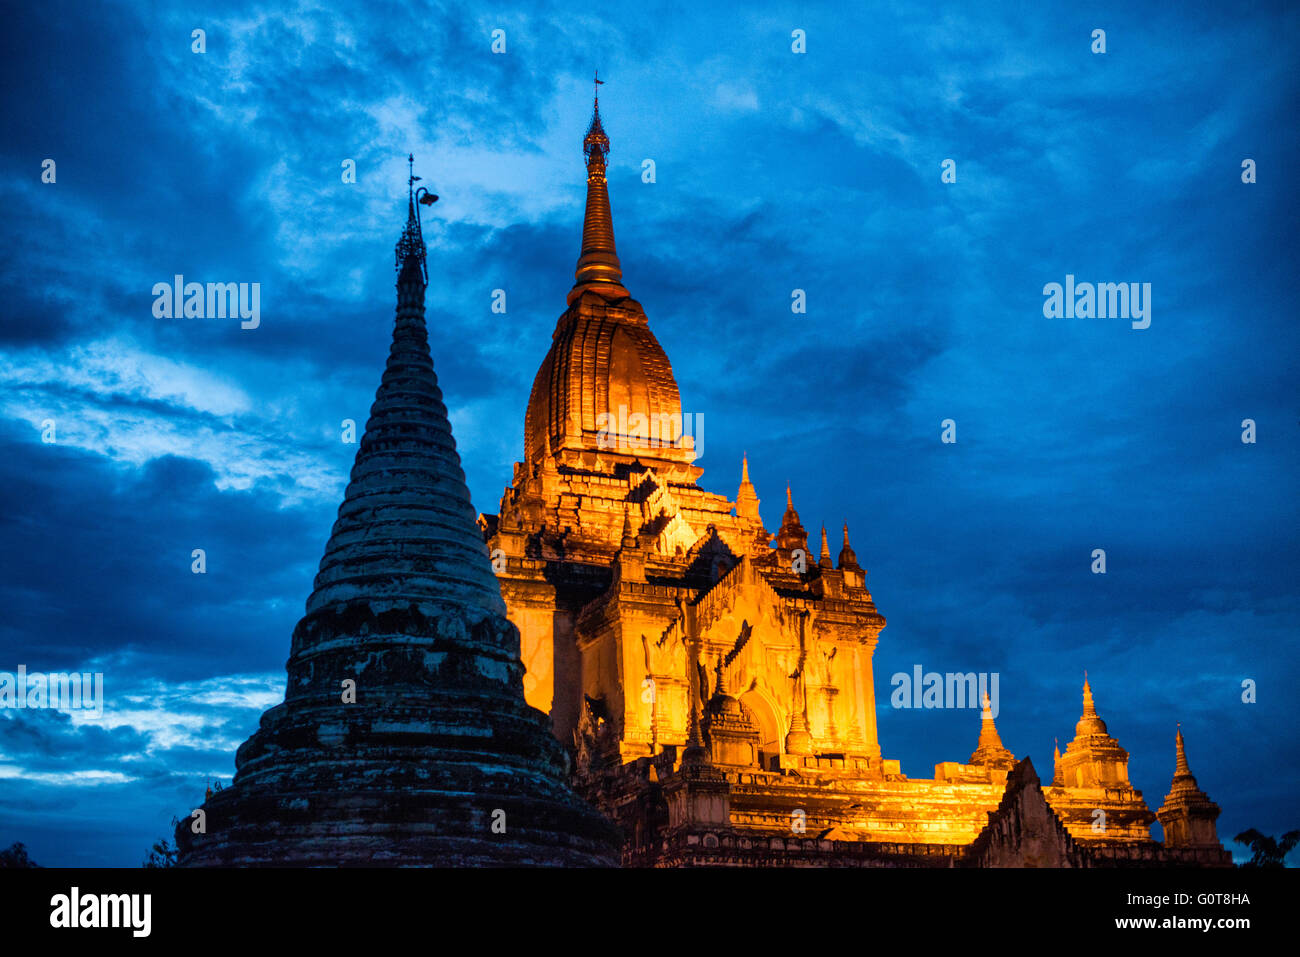 BAGAN, MYANMAR--Gawdawpalin Temple is the second tallest of the temples in the Bagan Archeological Zone and is located in the zone's northwest corner in Old Bagan. It is also known as Gaw-daw-palin Temple. It was built from 1174 to 1227. Stock Photo